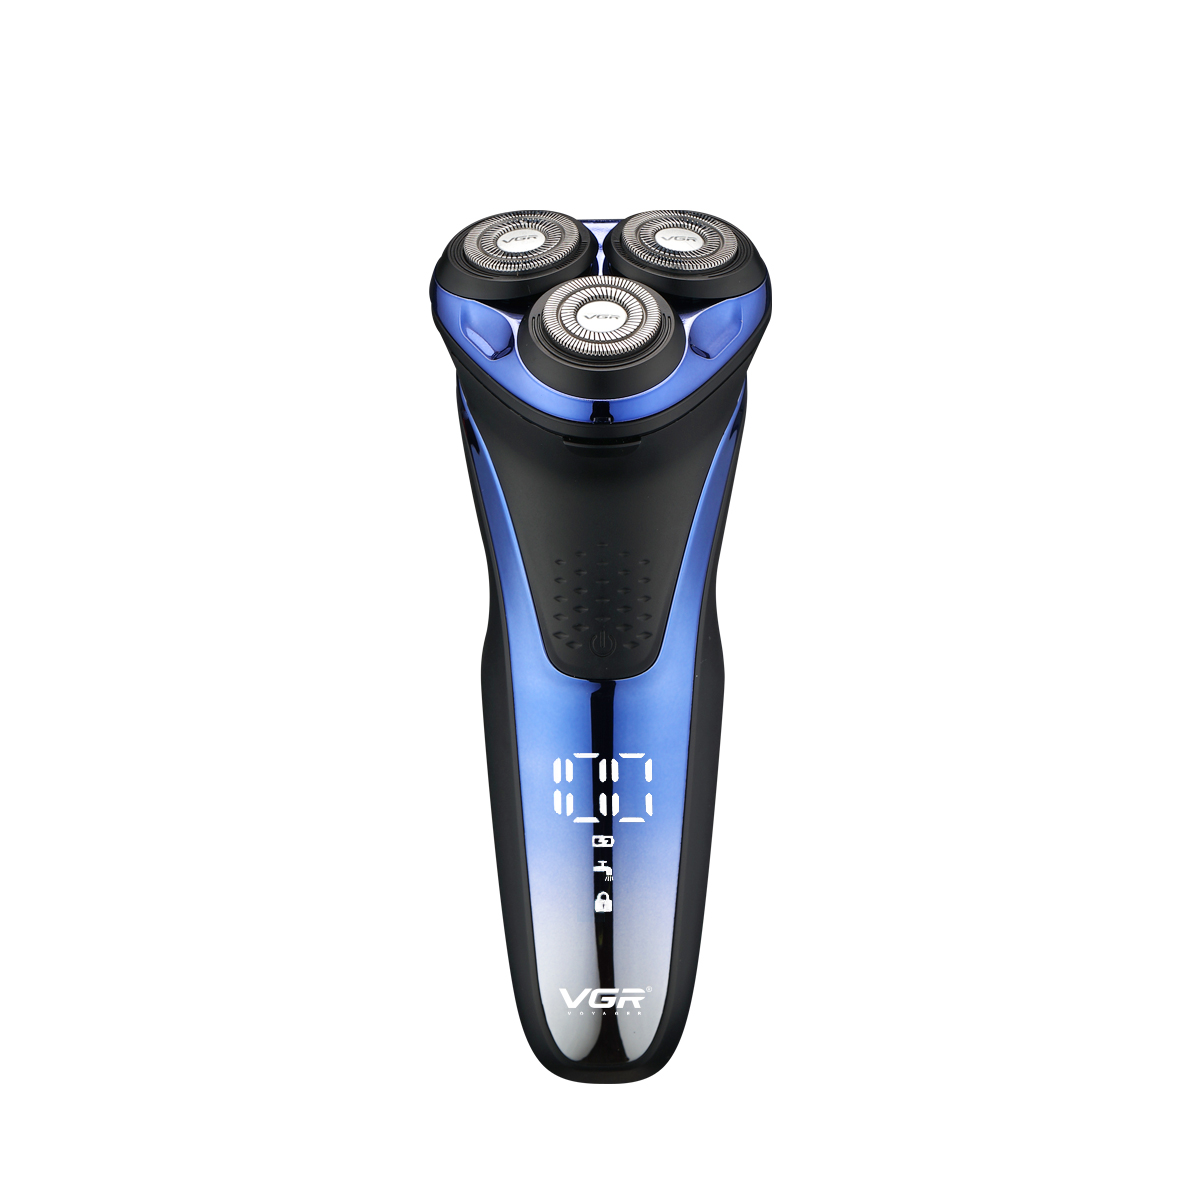 China Barber Clippers Suppliers, China Hair Clipper Factory, China Hair Clipper Supplier, China Electric Mini Shaver, Cordless Electric Man Shaver Factory, Custom Portable Hair Trimmer, Custom Professional Hair Clipper Trimmer, Hair Trimmer Made In China, Hair Trimmer Manufacturer, Hair Trimmer Set Factory, Hair Trimmer Supplier